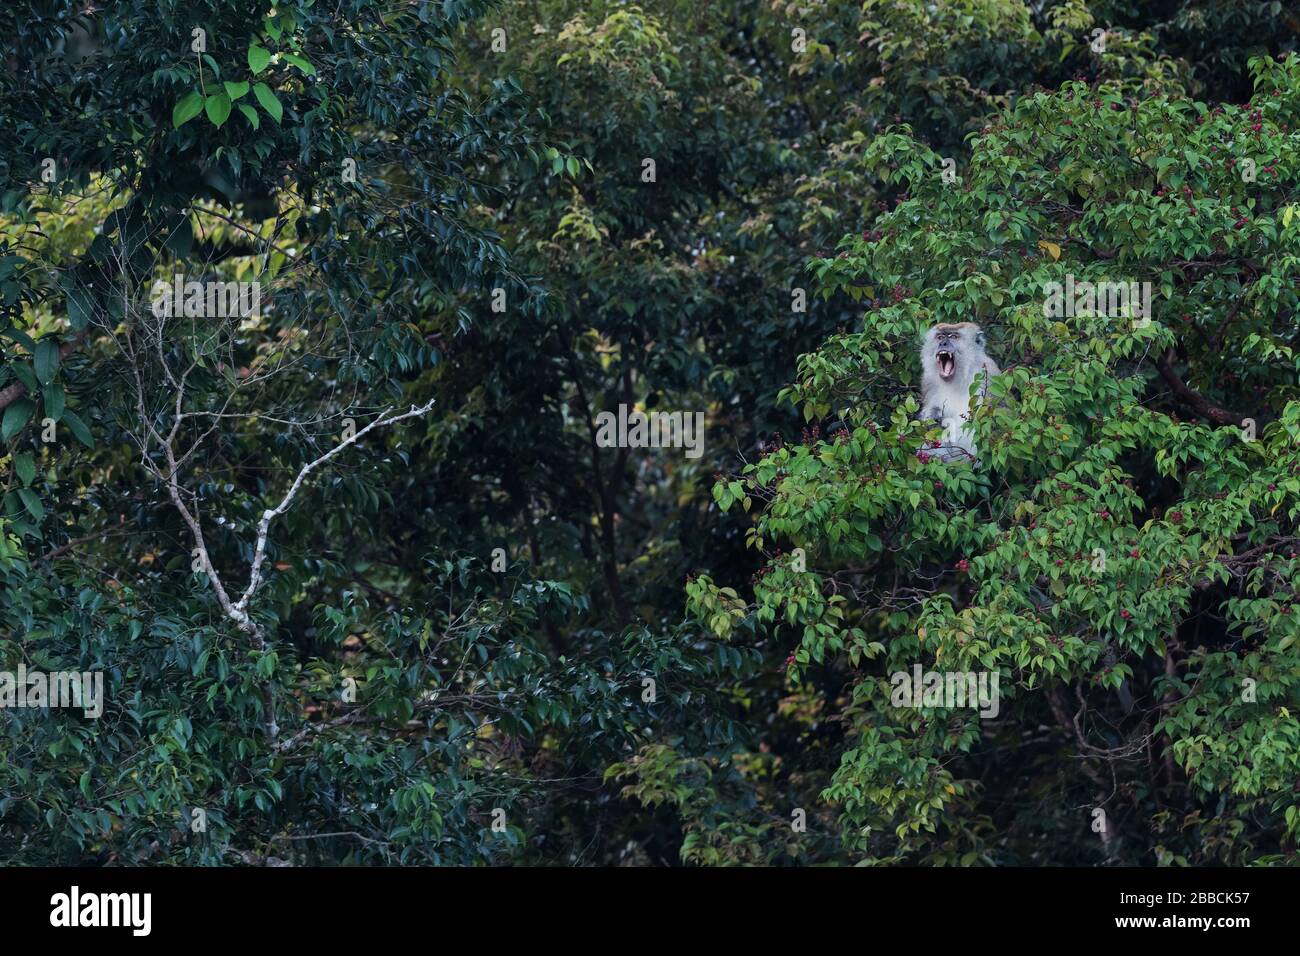 Long-tailed Macaque - Macaca fascicularis, common monkey from Southeast Asia forests, woodlands and gardens, Pangkor island, Malaysia. Stock Photo